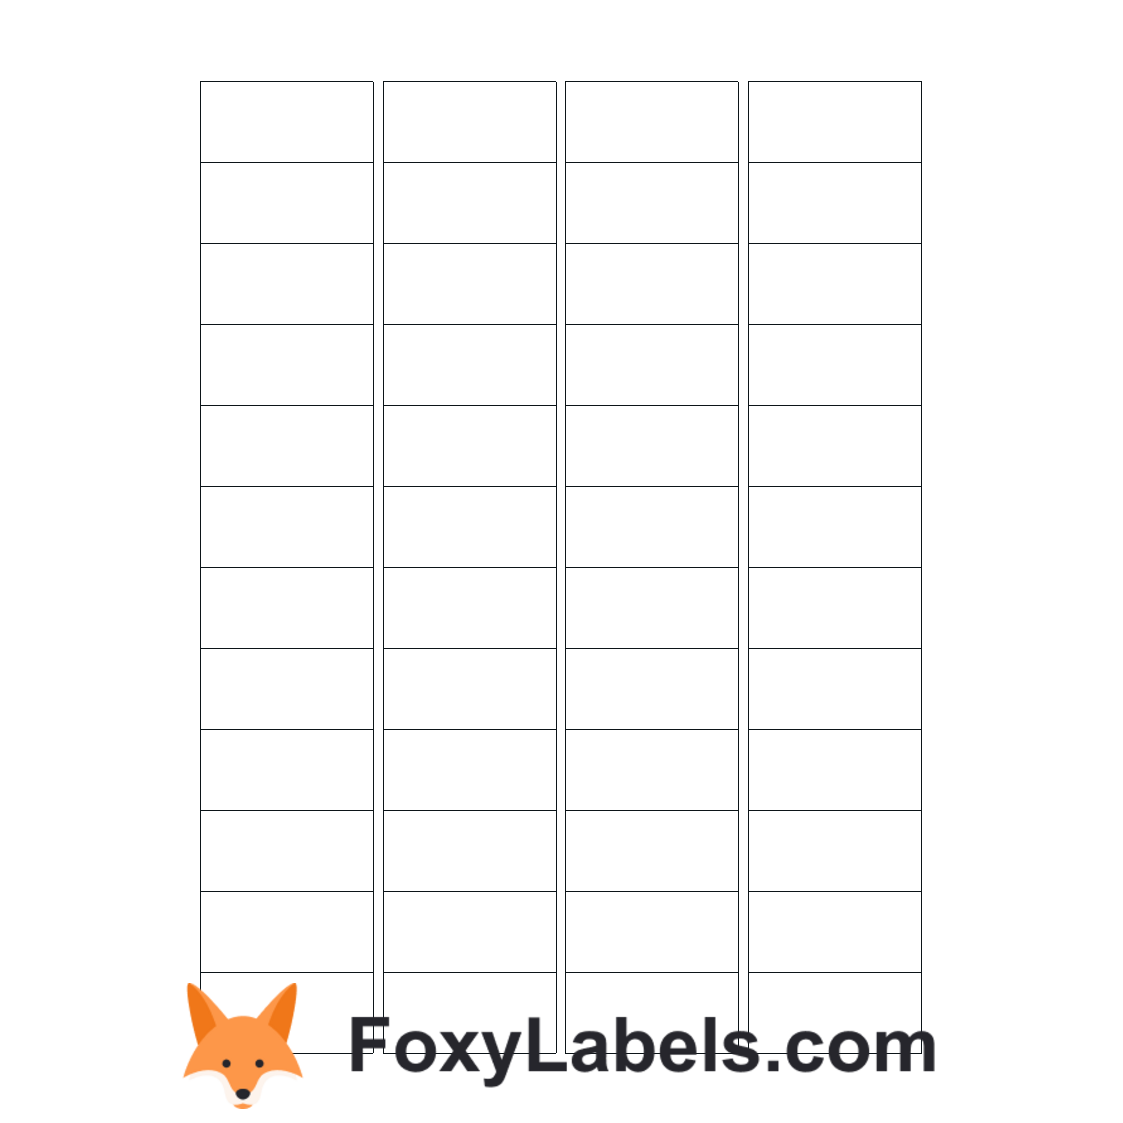 Avery-Zweckform L7873 label template for Google Docs